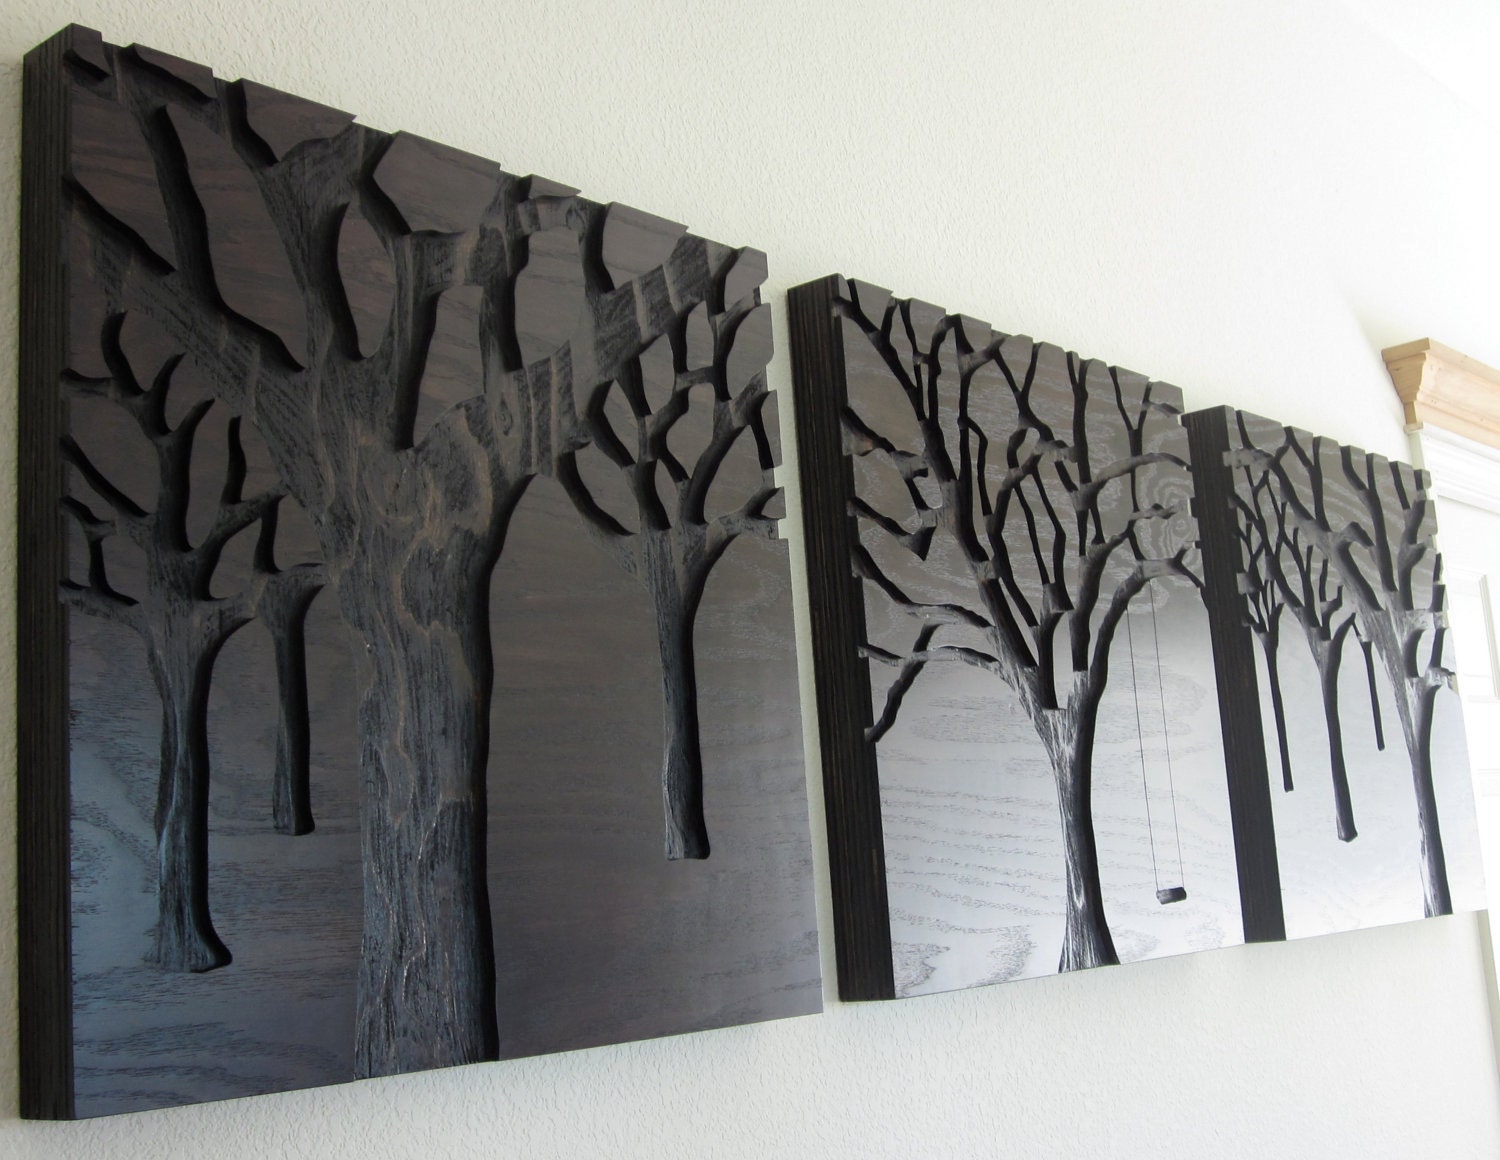 Rustic Modern Wall Art, Triptych Art Set, Large Art, Wood Carvings, Abstract Nature